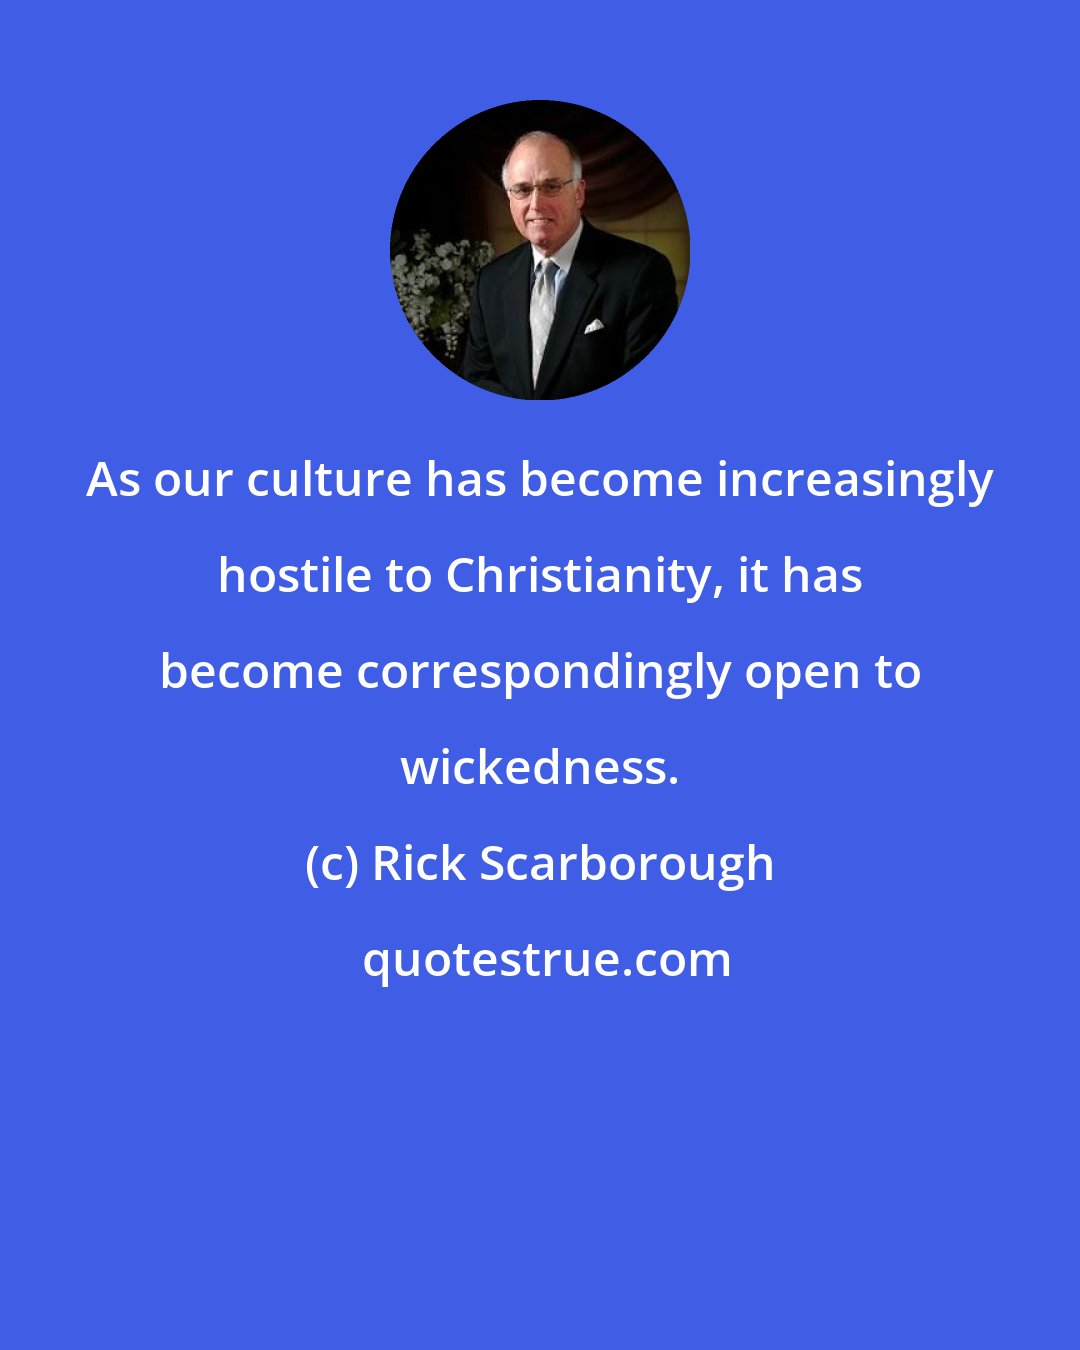 Rick Scarborough: As our culture has become increasingly hostile to Christianity, it has become correspondingly open to wickedness.